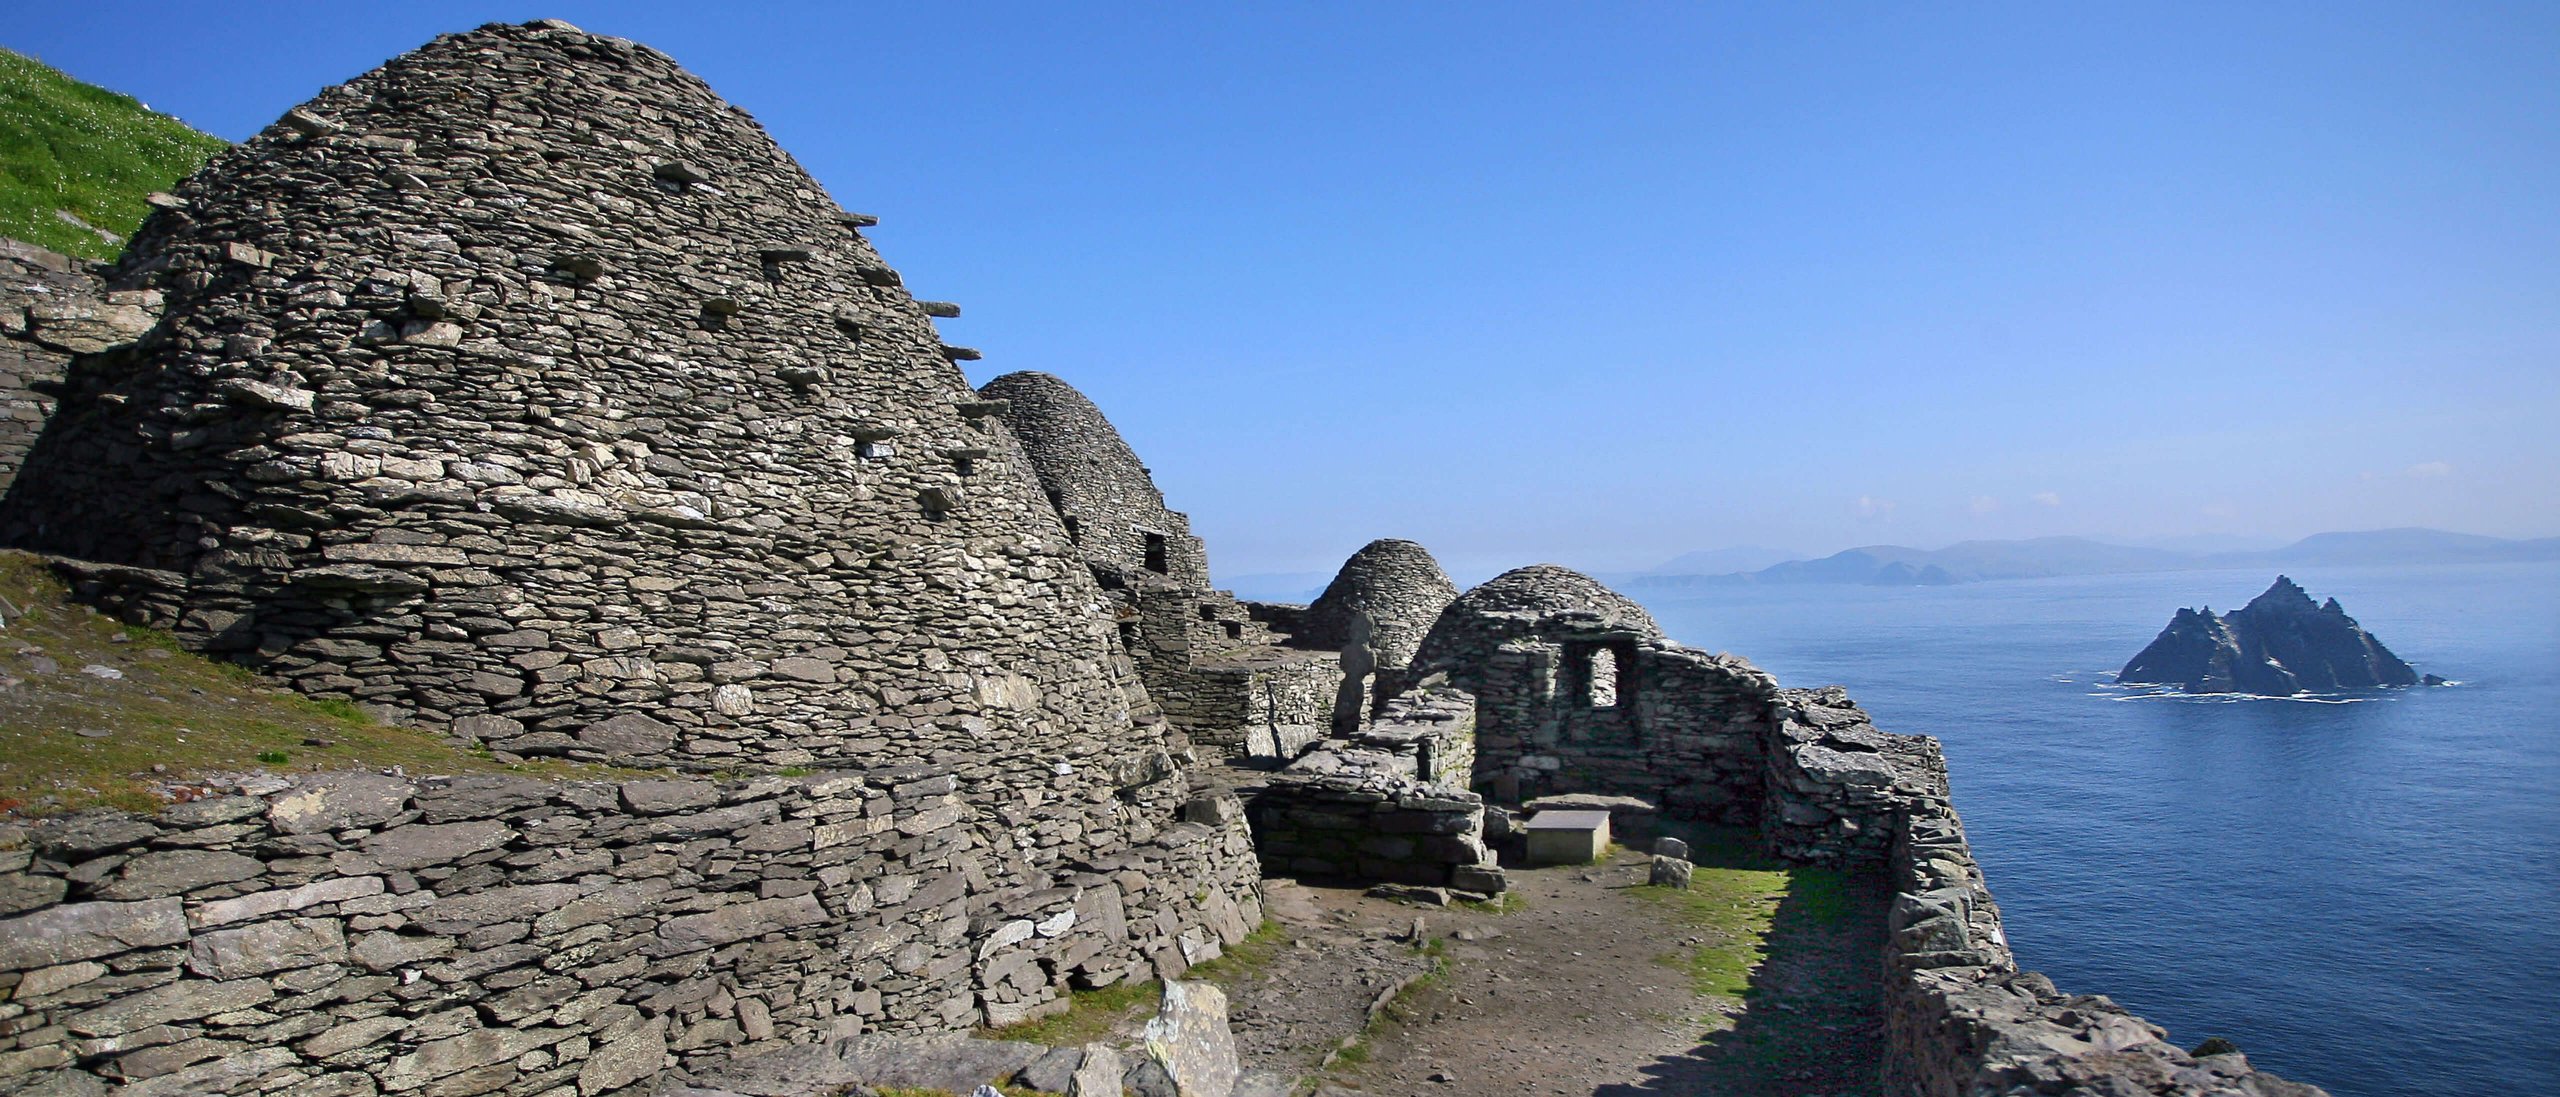 View from Skellig Michael's Beehive huts and monastery out over Little Skellig